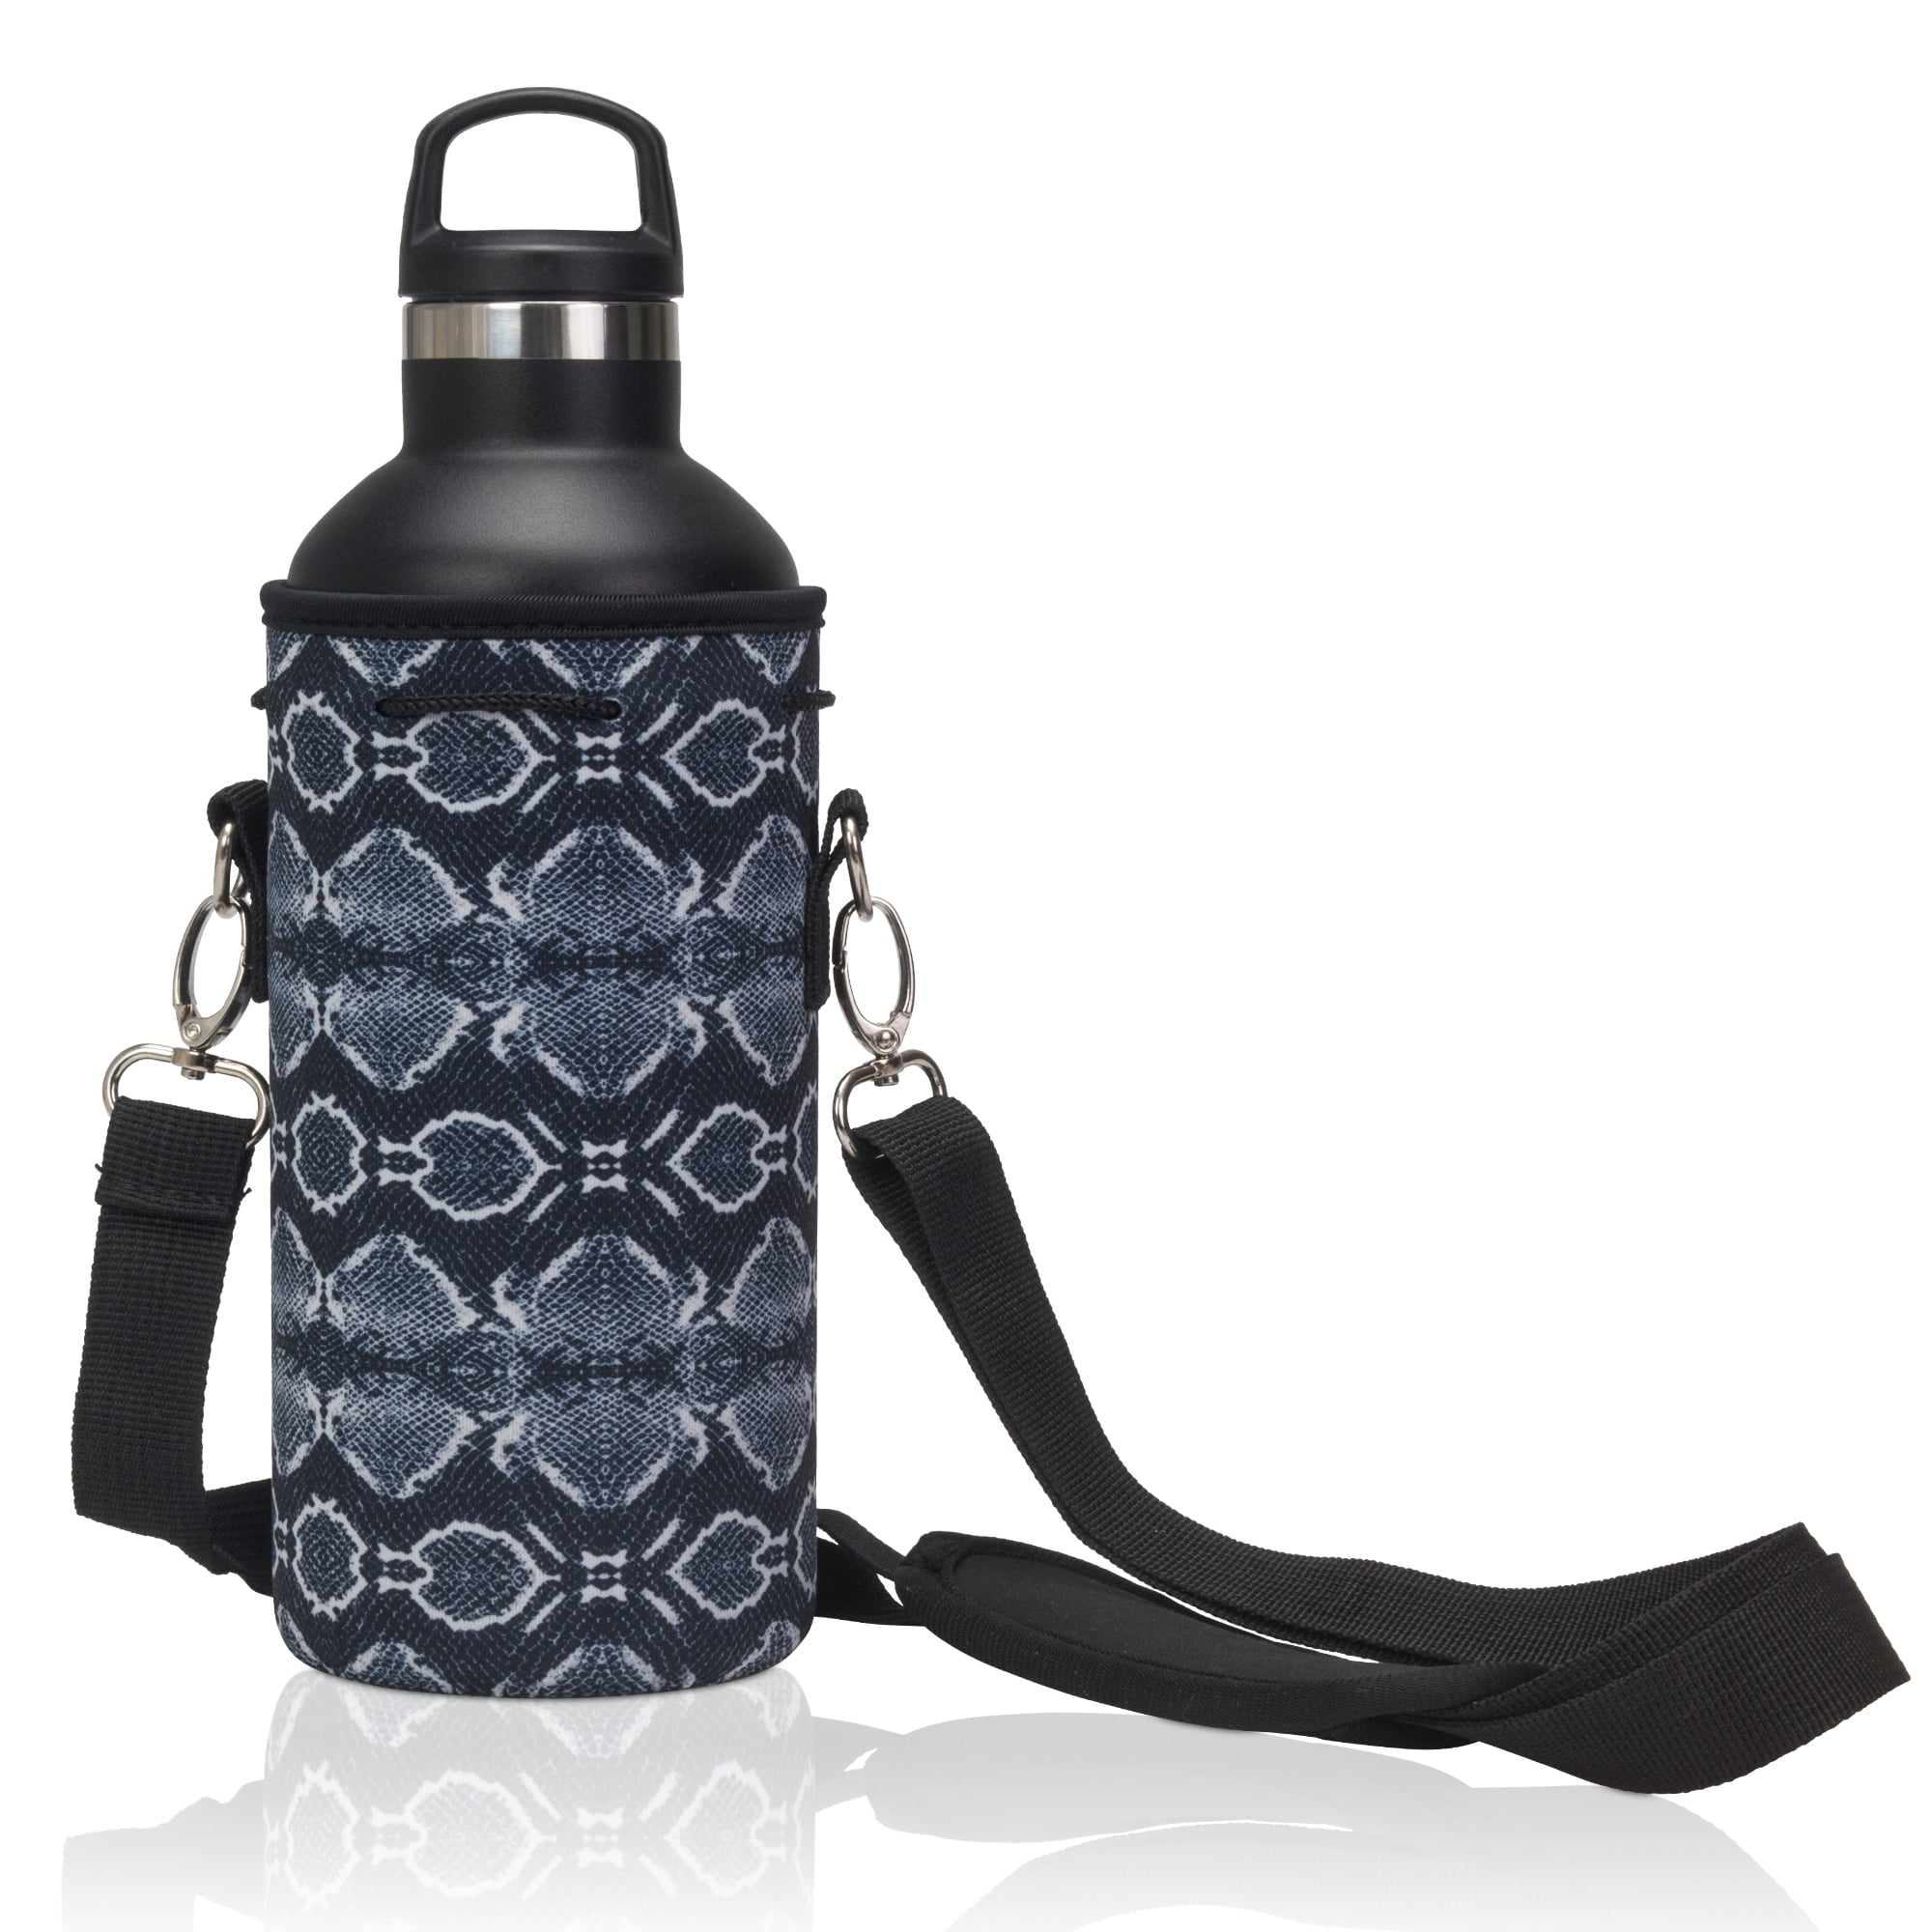 NATURE PIONEOR Neoprene Insulated Water Bottle Holder with Shoulder Strap  for 40OZ Sports Water Bottles, Carrier/Pouch Sleeve for Camping, Hiking,  Fishing and Travel 40OZ Black-40 oz